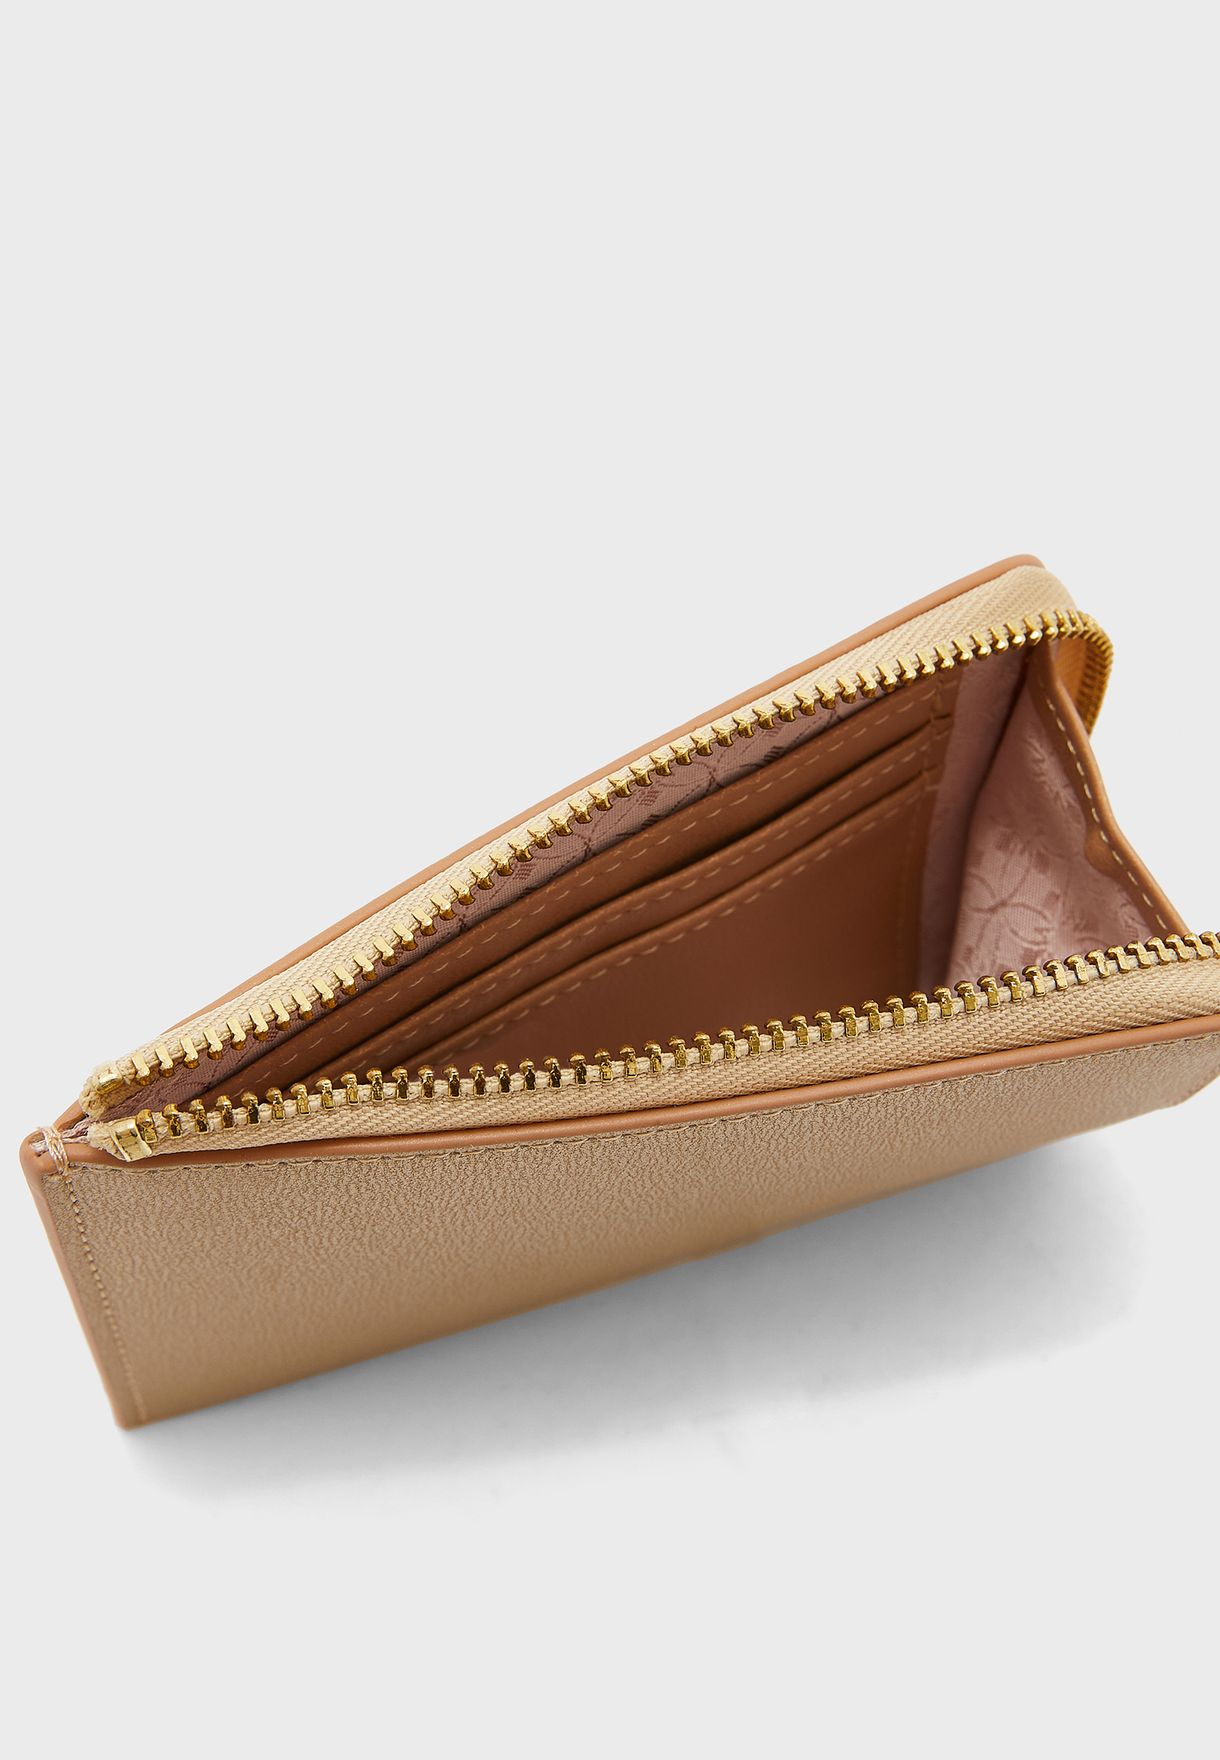 Faux Leather Card Holder